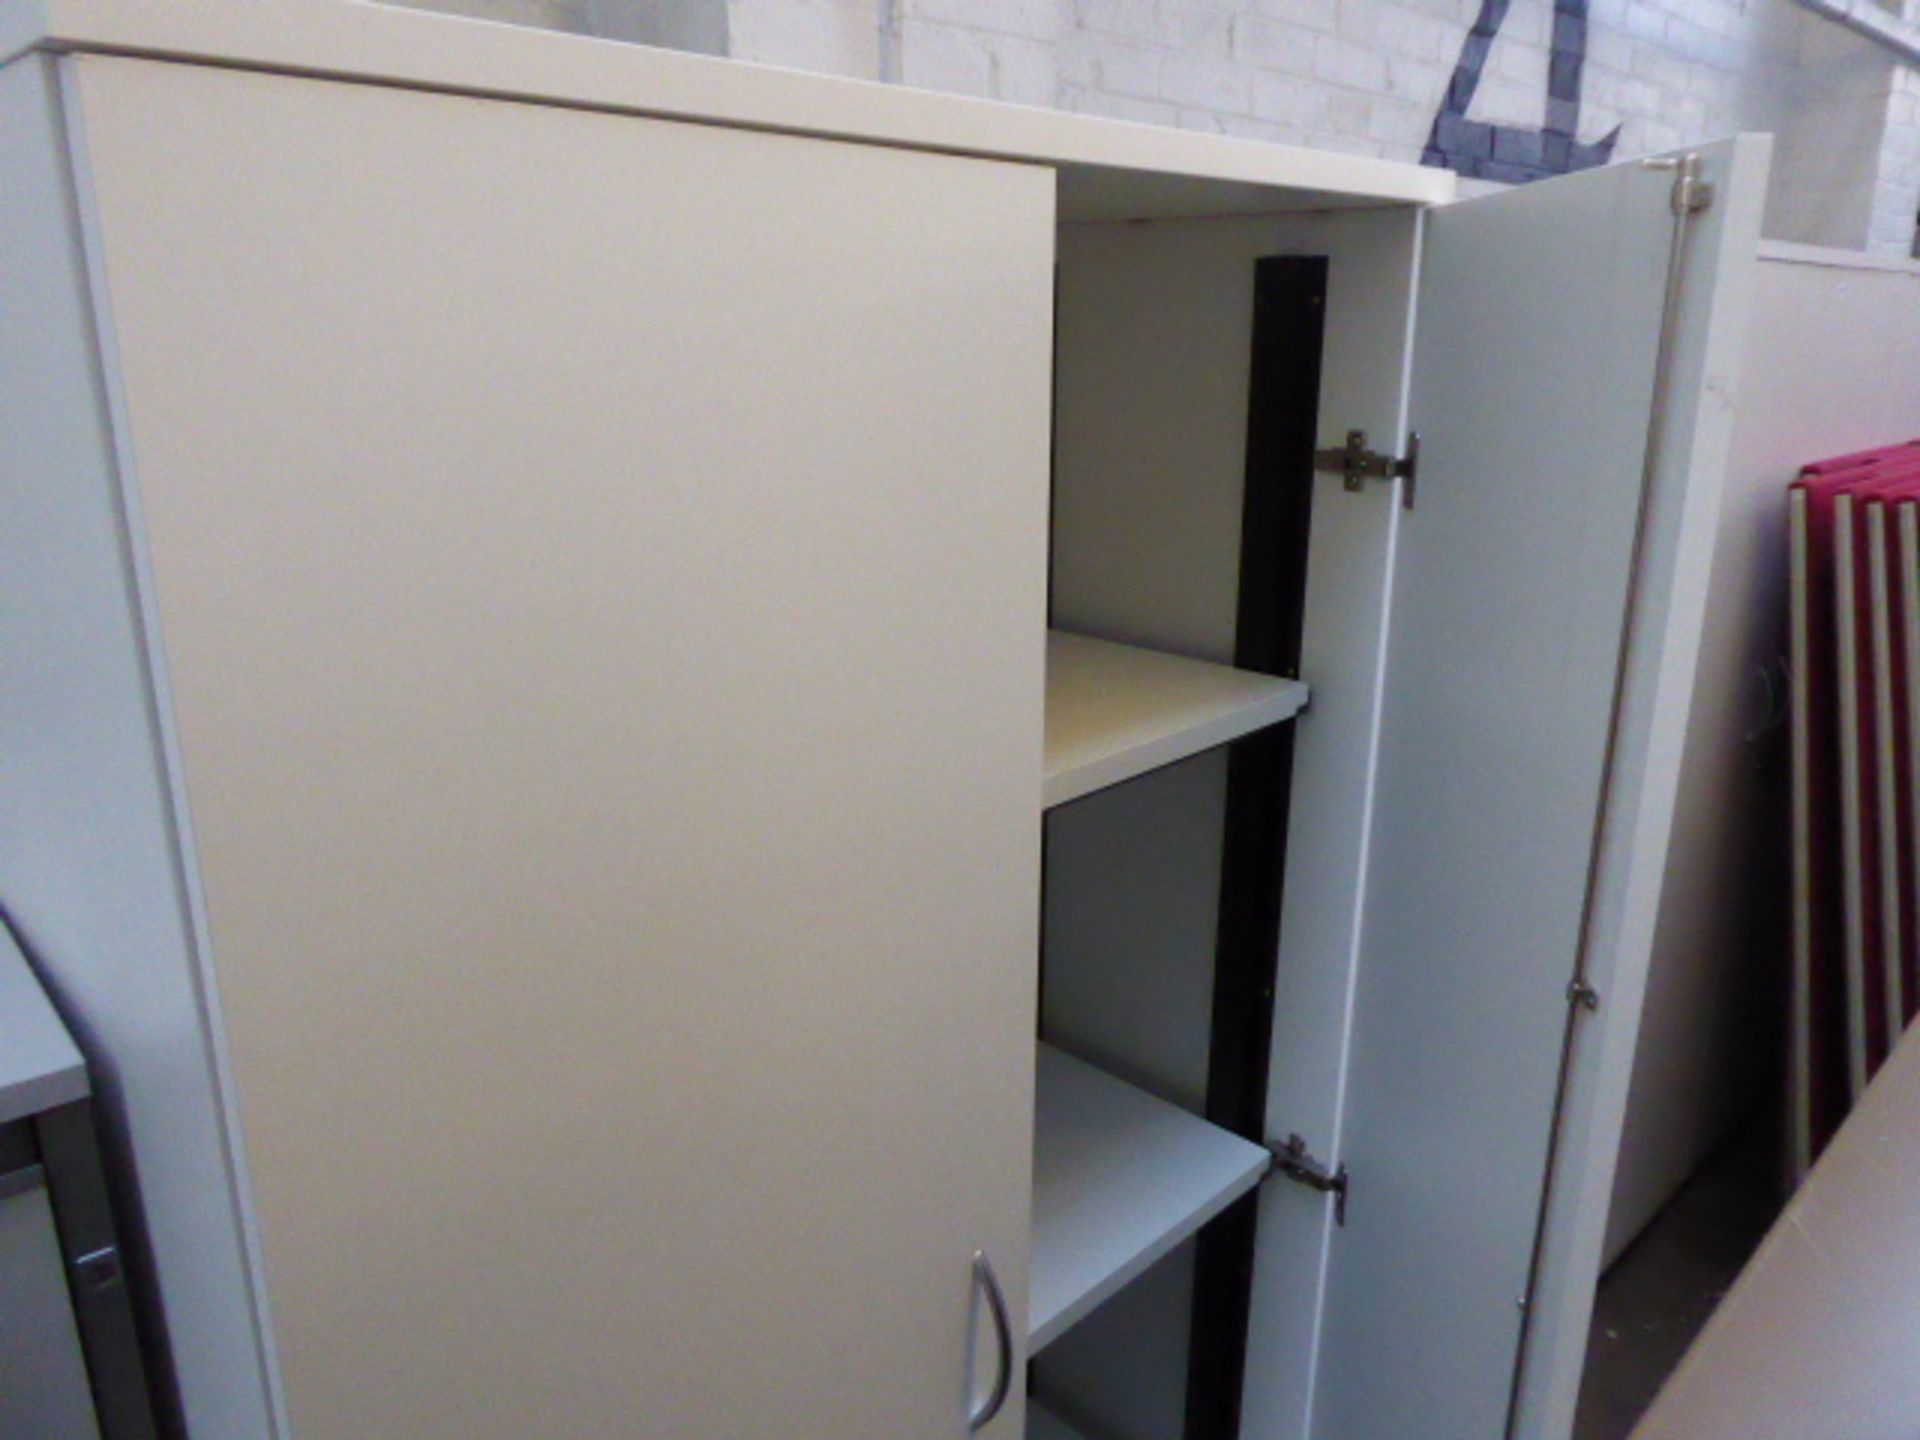 95cm by 180cm tall 2 door stationary cabinet - Image 2 of 2